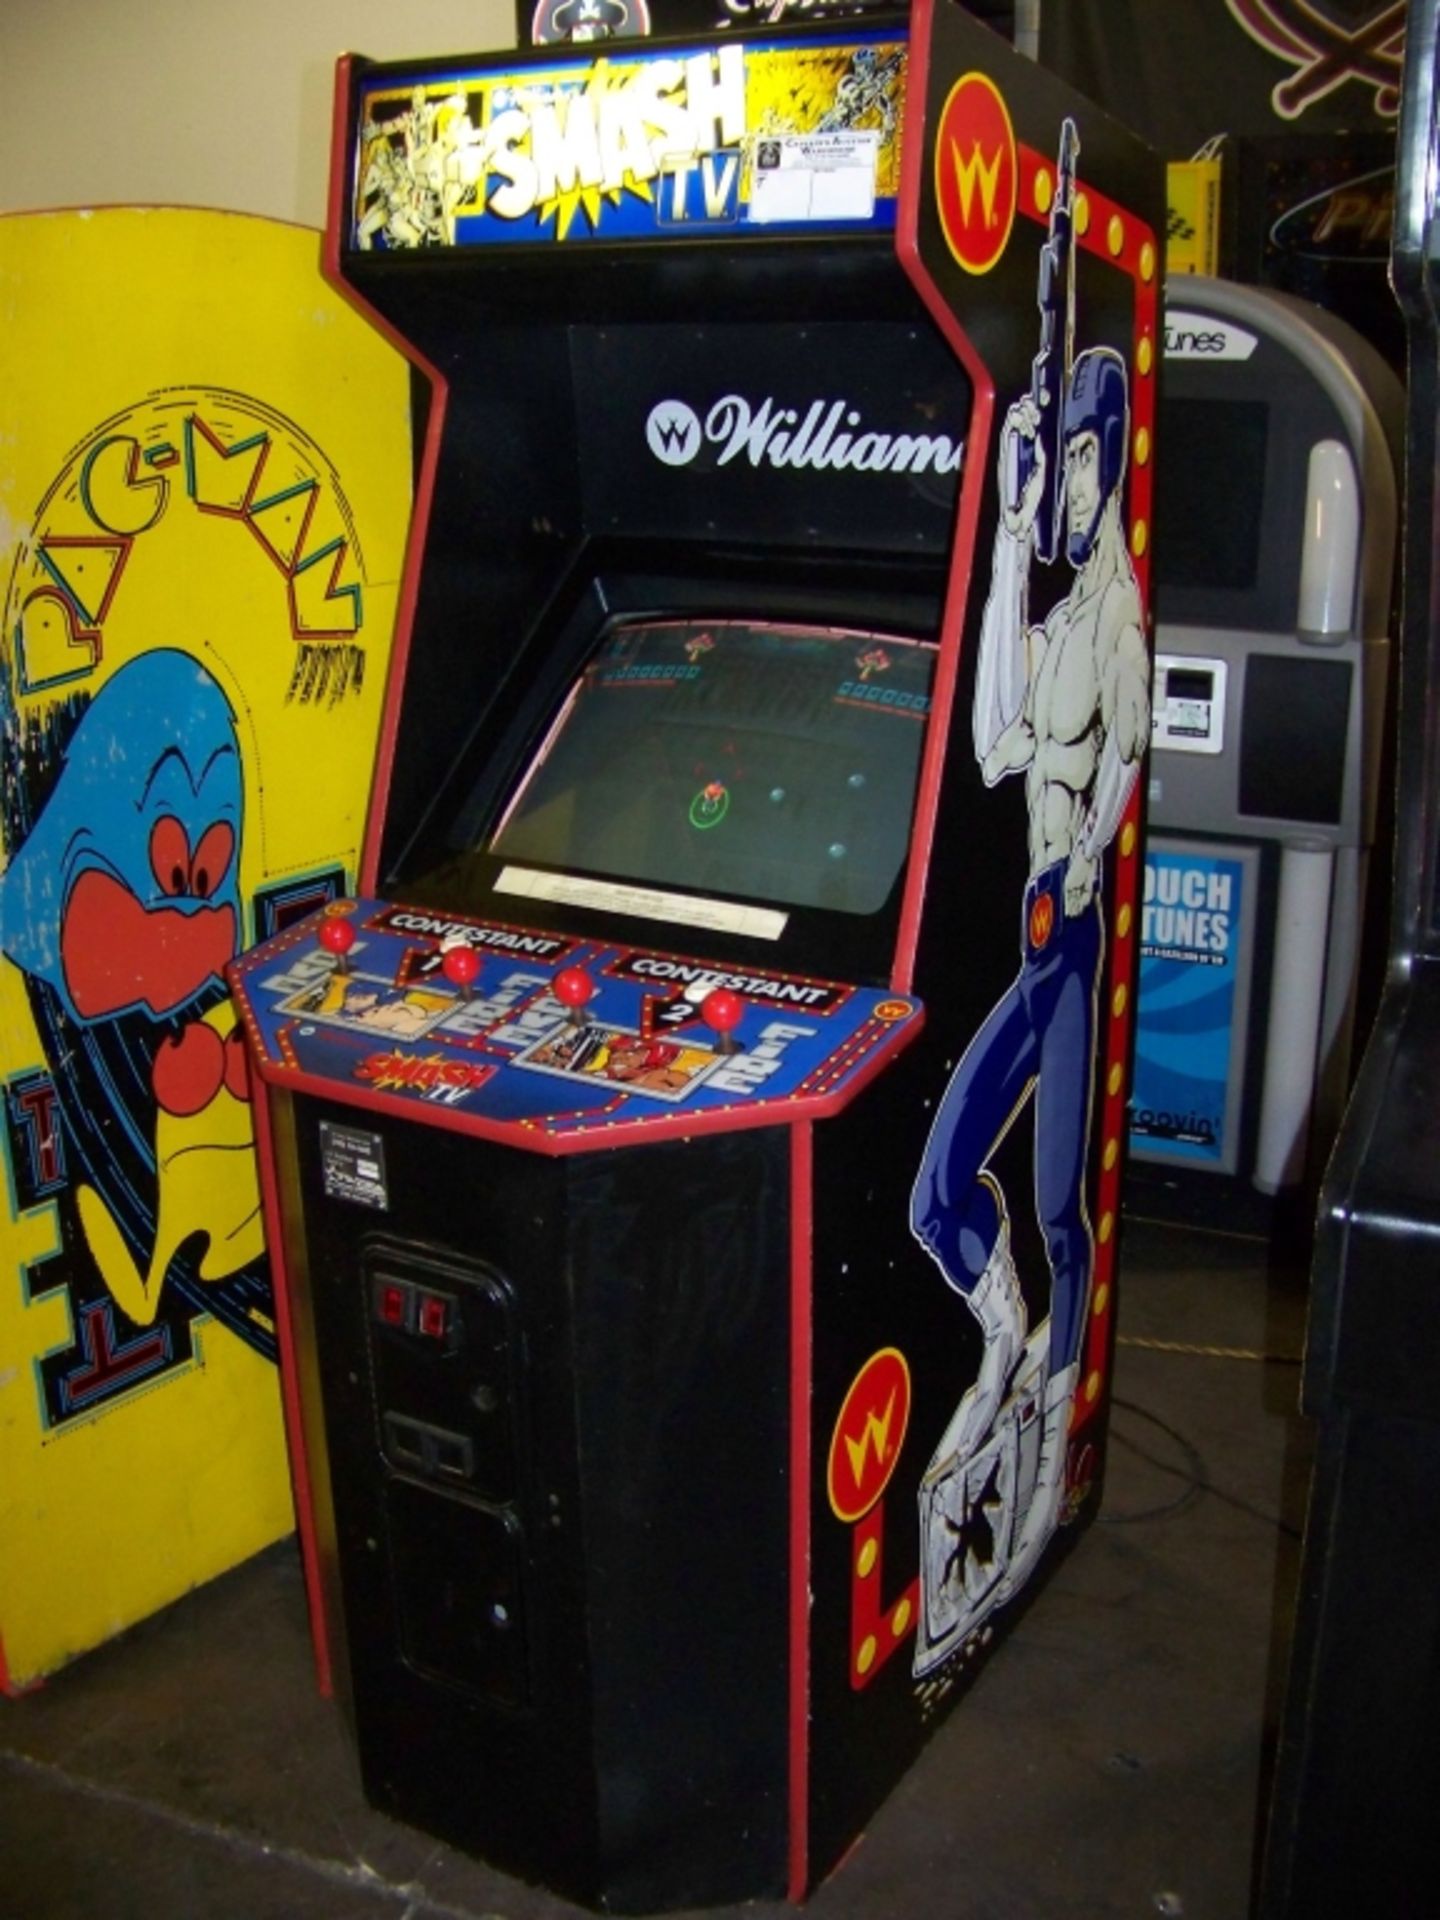 SMASH TV CLASSIC ARCADE GAME WILLIAMS Item is in used condition. Evidence of wear and commercial - Image 6 of 9